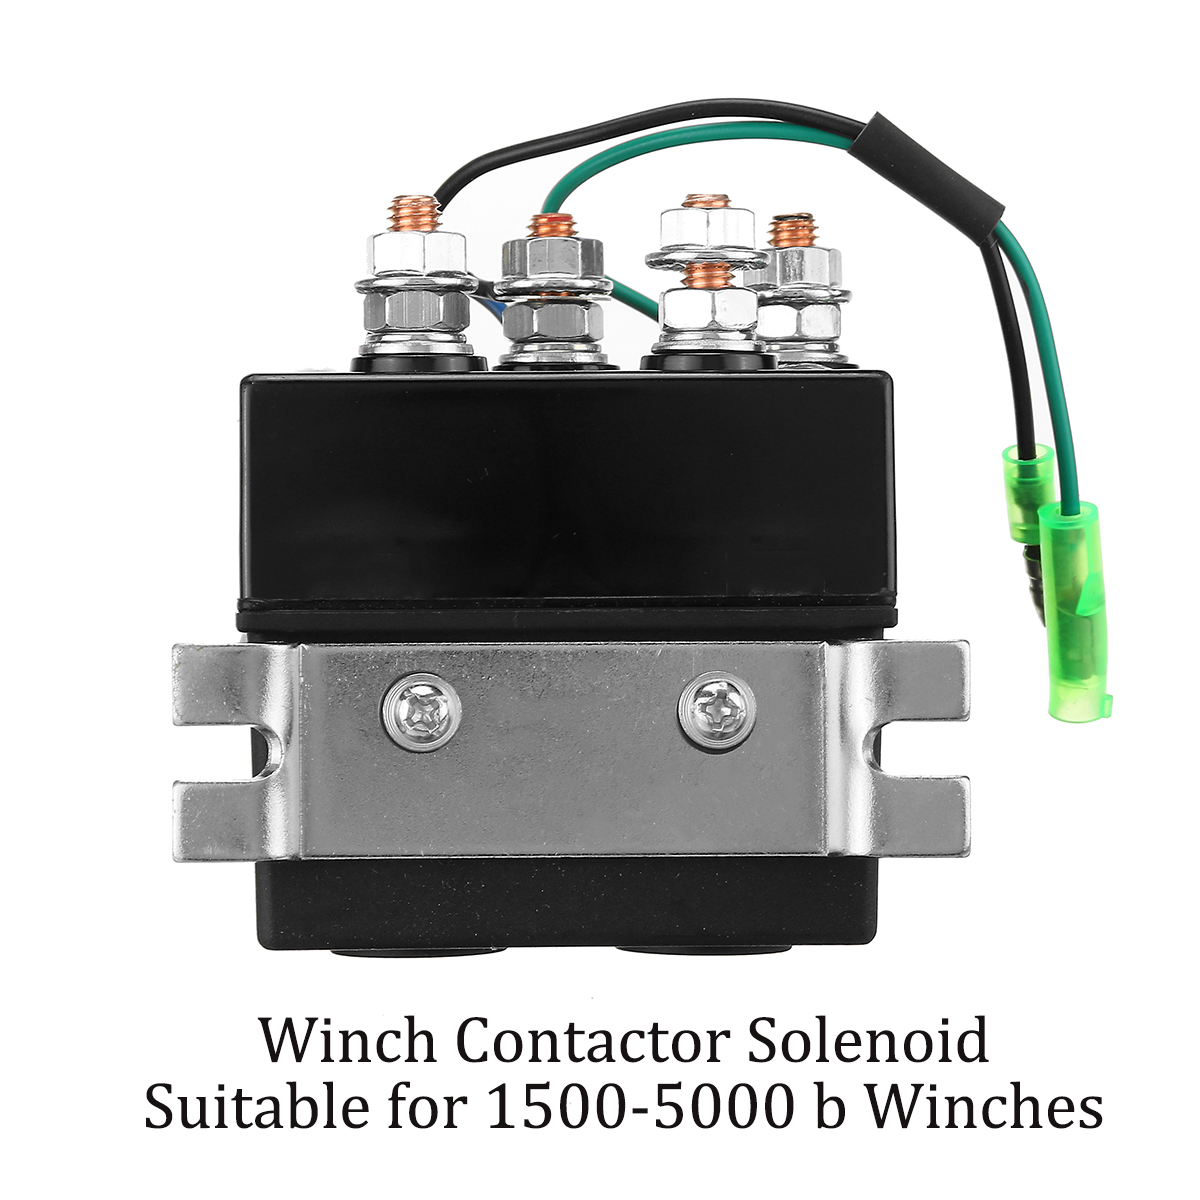 Winch Switch Replacement Number 63070 62135 74900 2875714 70715 KanSmart Winch Solenoid Relay Contactor 12V 250A Thumb Truck for ATV UTV Boat 4x4 Vehicles 1500-5000lbs Winch with 6 Protecting Caps 